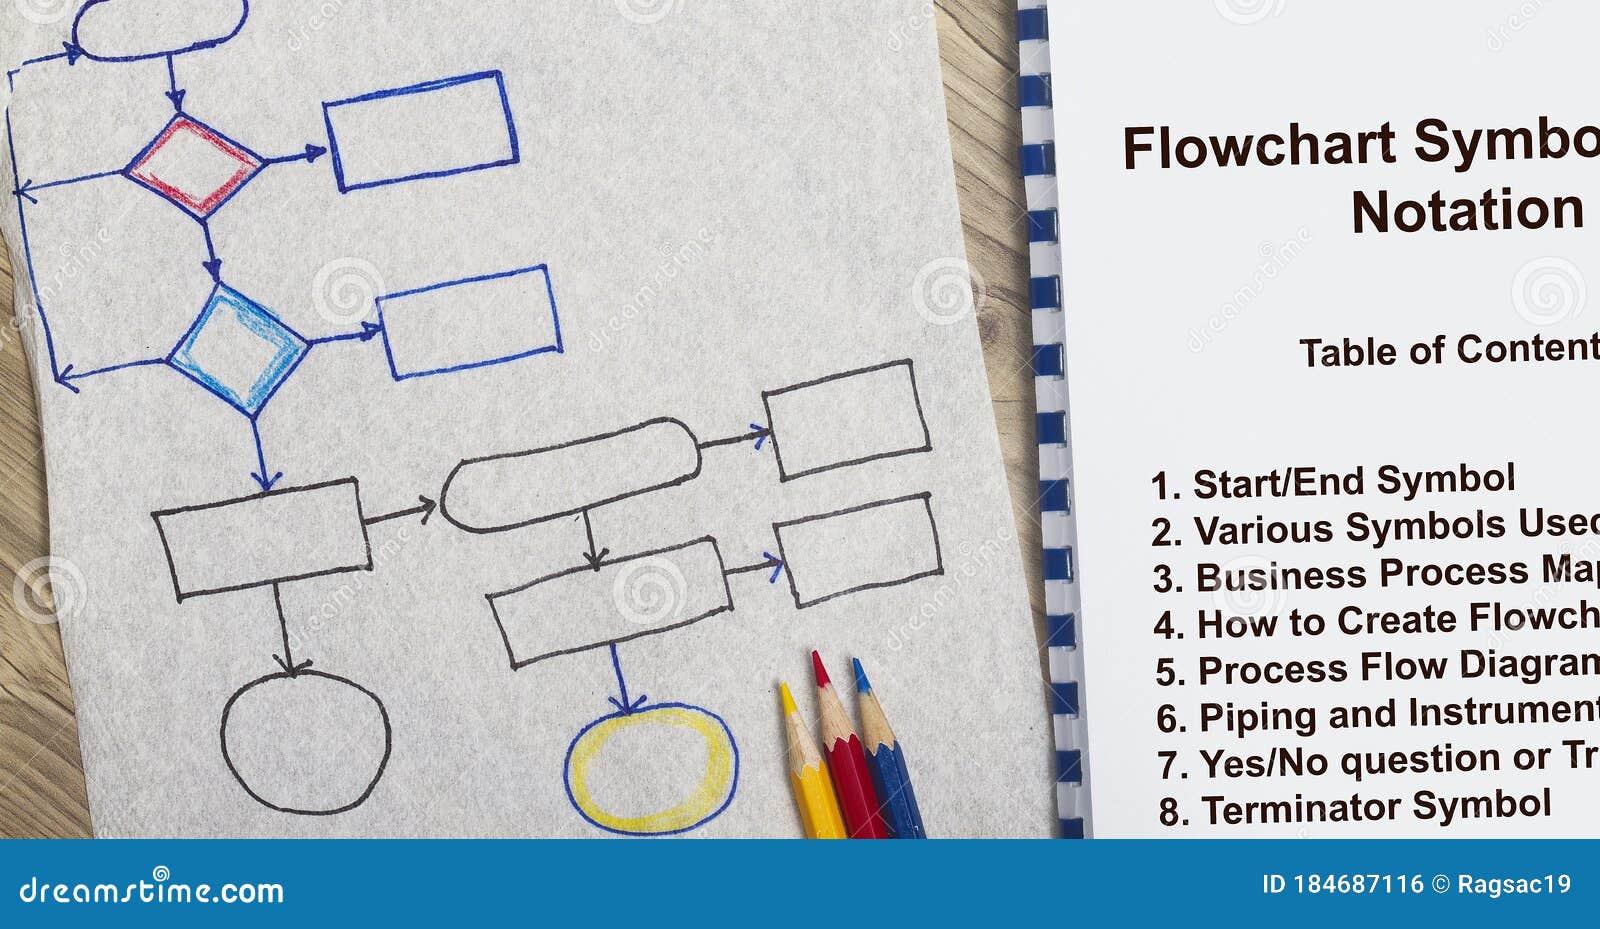 How to create flowcharts in drawio  drawio